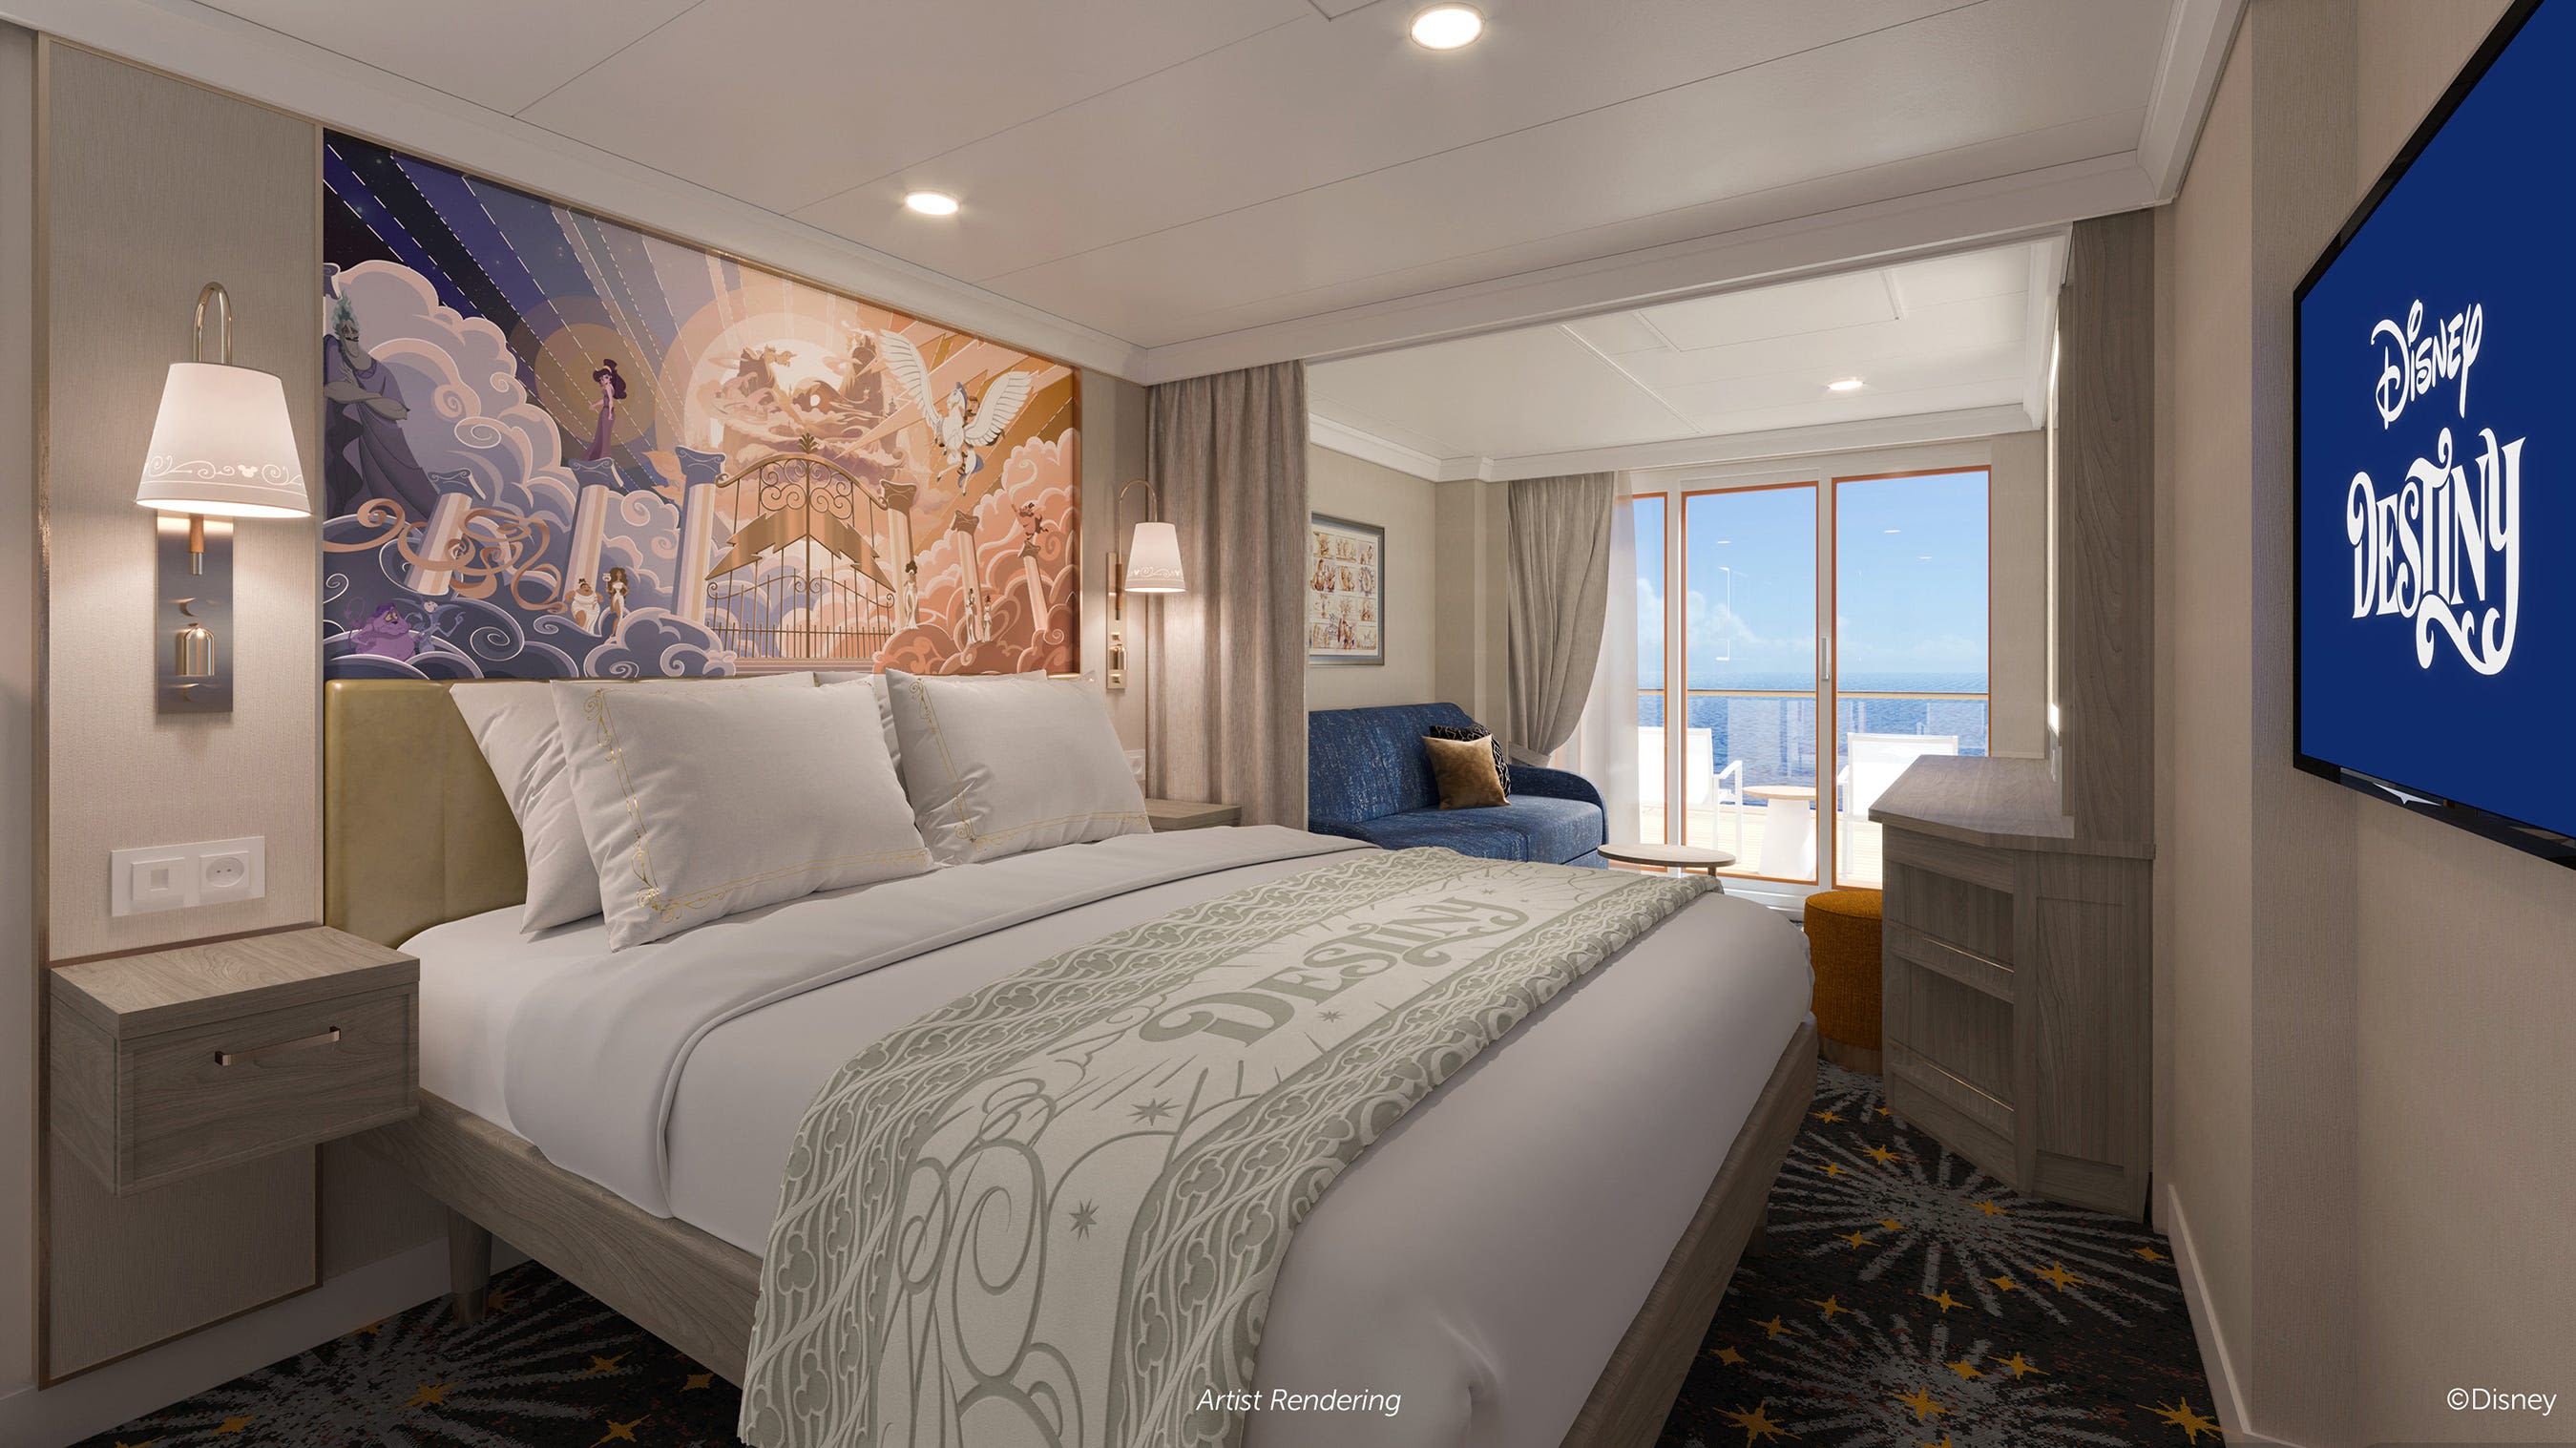 Even heroes need a vacation: What to expect from the Disney Destiny cruise ship